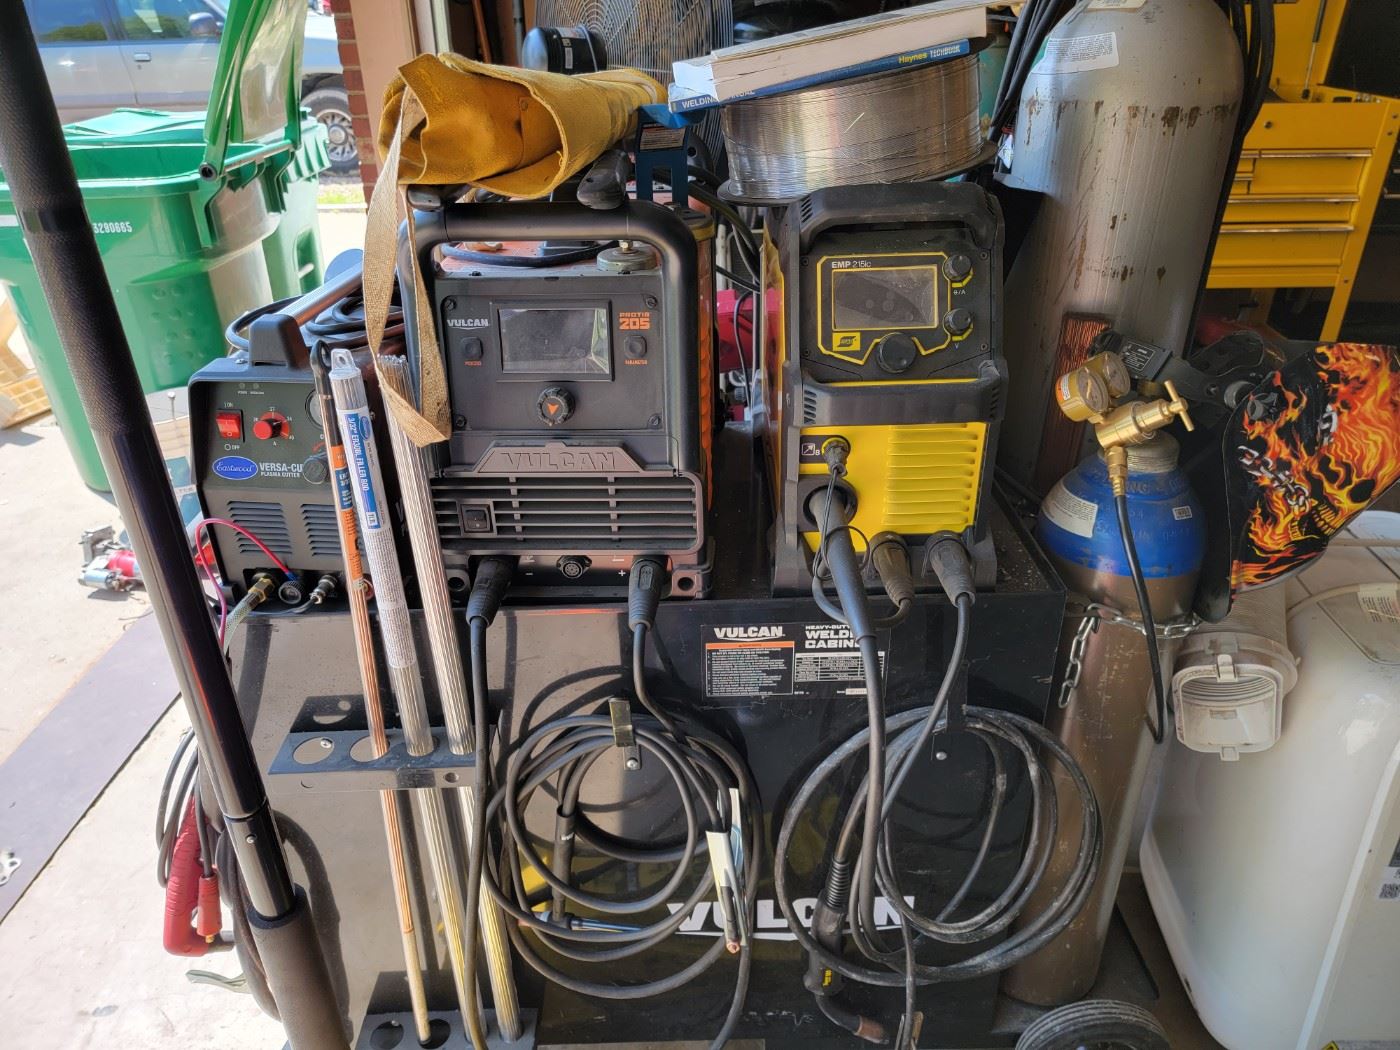 Welding Cabinet with Eastwood Plasma Cutter, Vulcan 205 Welder, ESAB EMP 215ic Welder, Gas Cylinders and various rod/coil supplies.